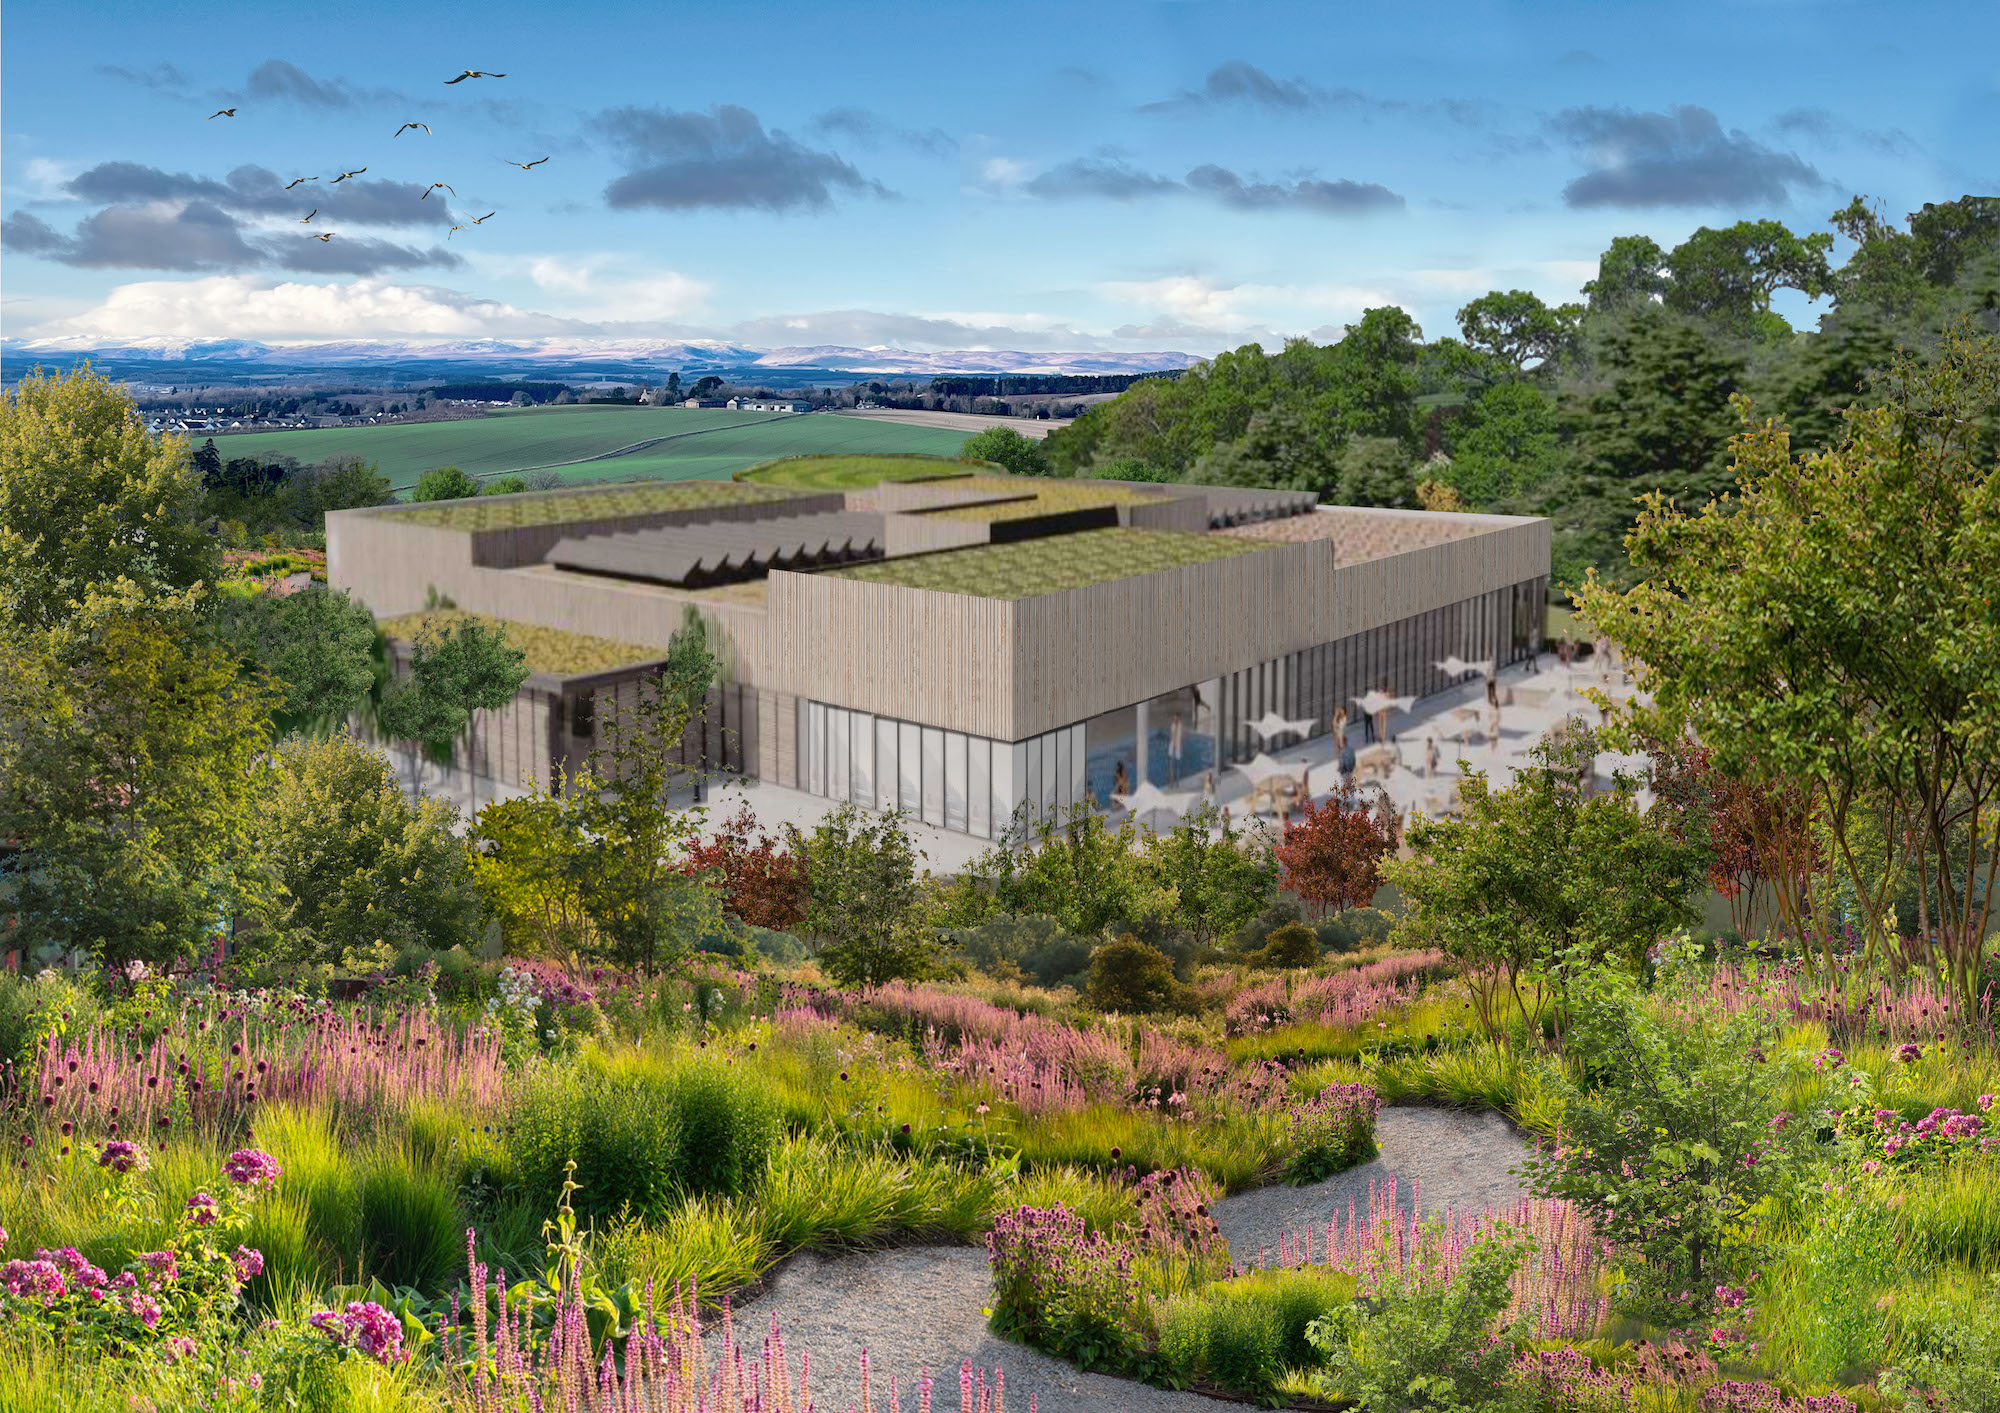 Murrayshall Country Estate granted permission in principle for £30m expansion